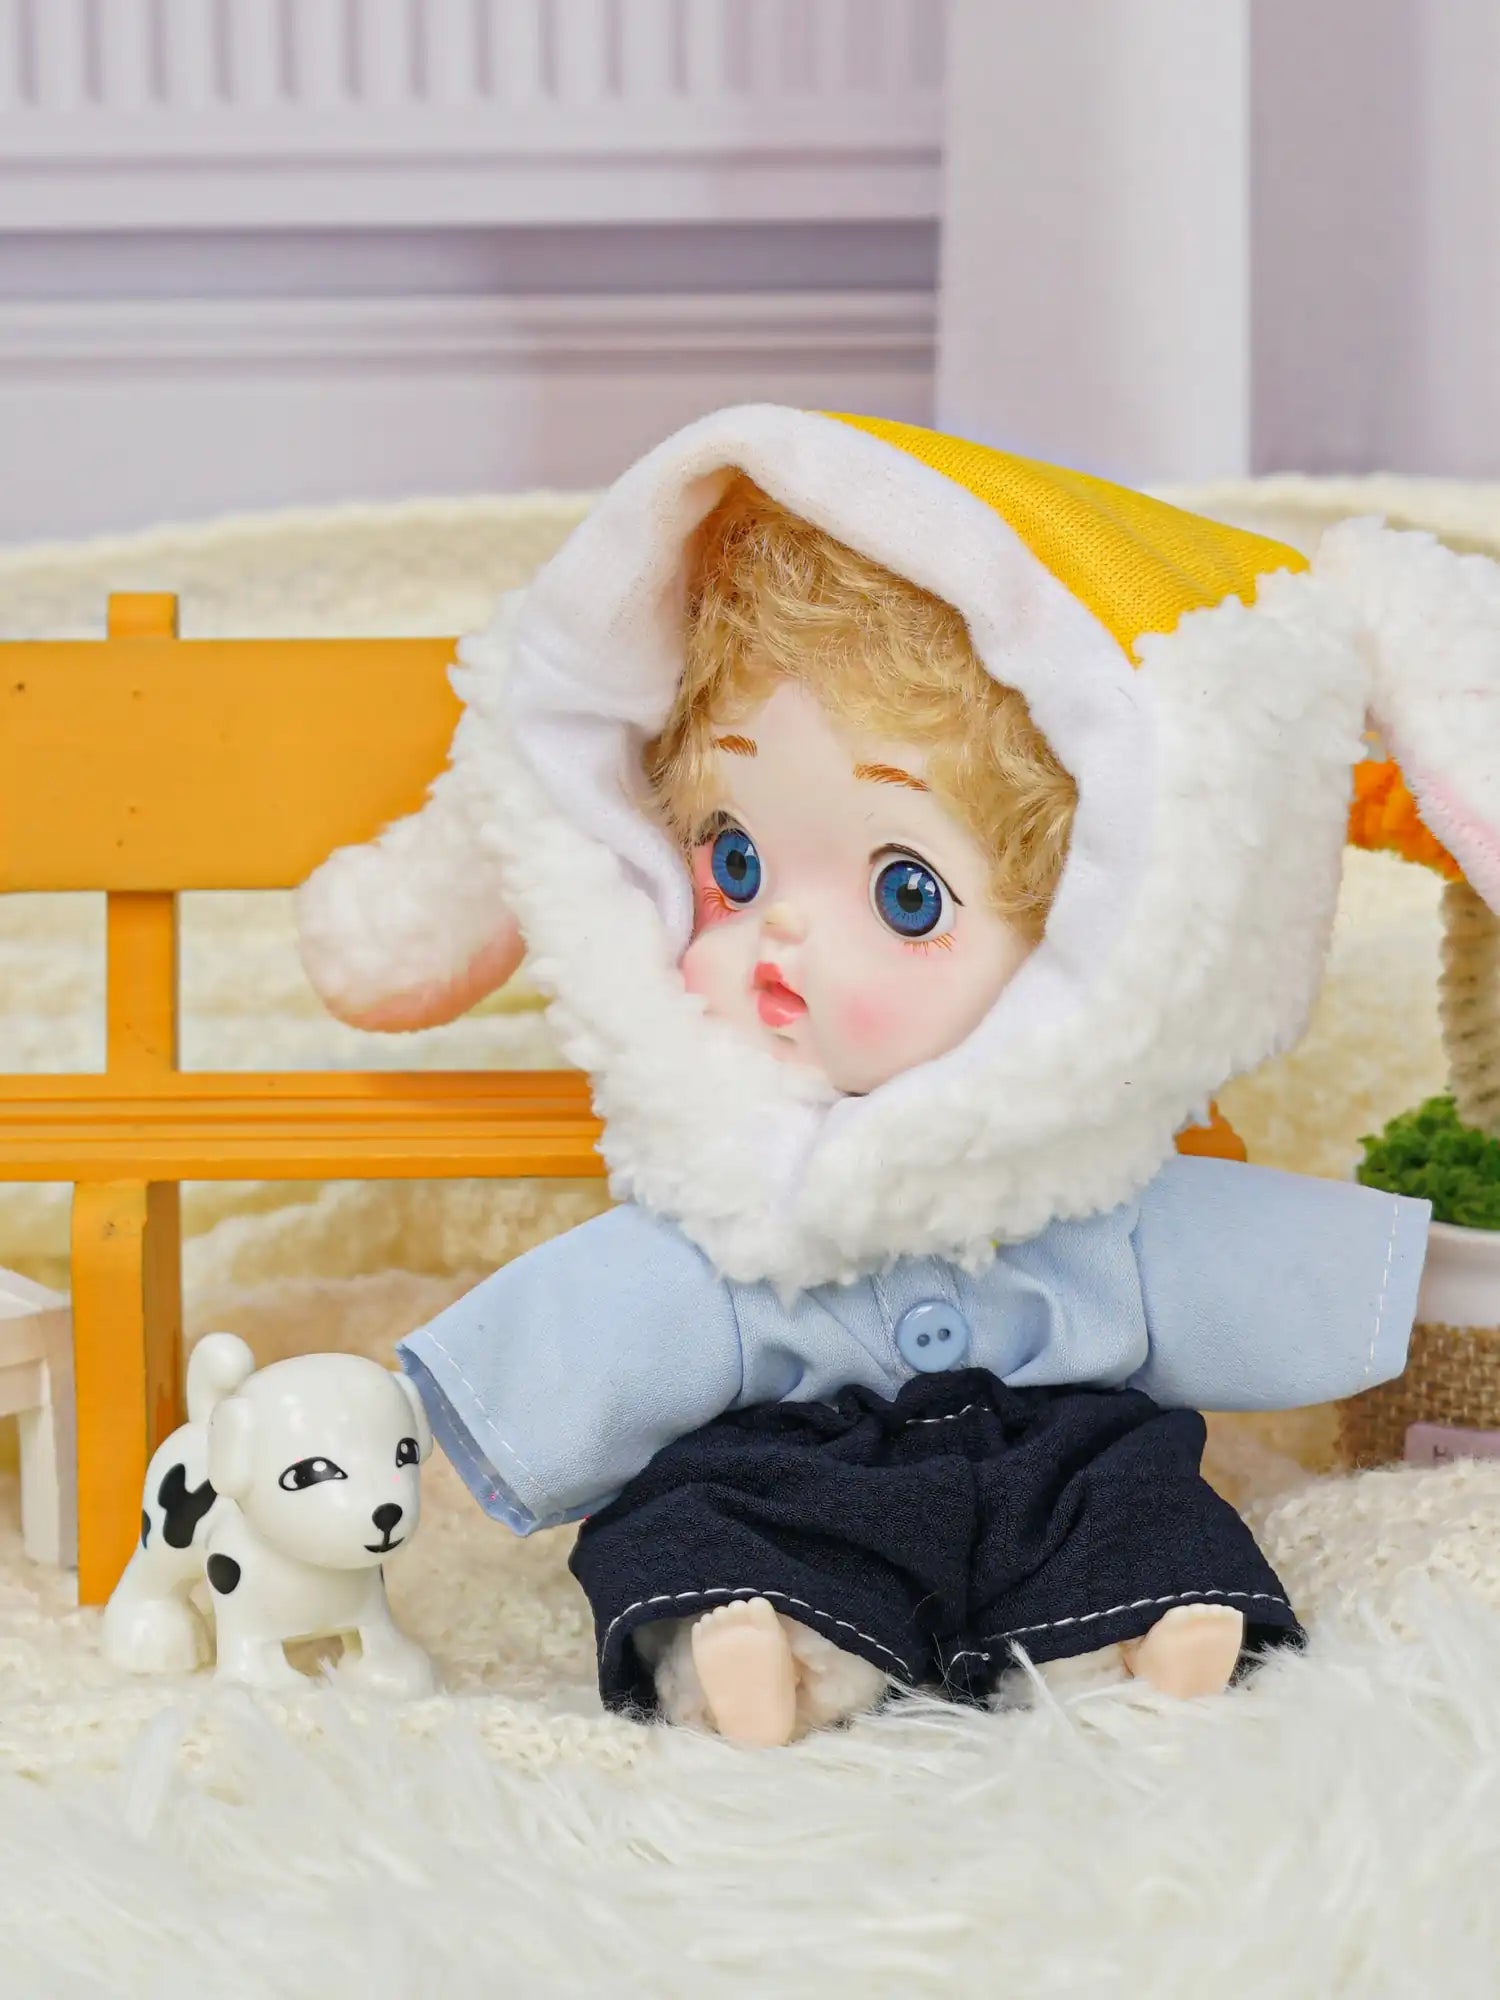 A sweet doll wearing a lamb hat with yellow trim, positioned near a tiny dog figure and delicate miniatures.